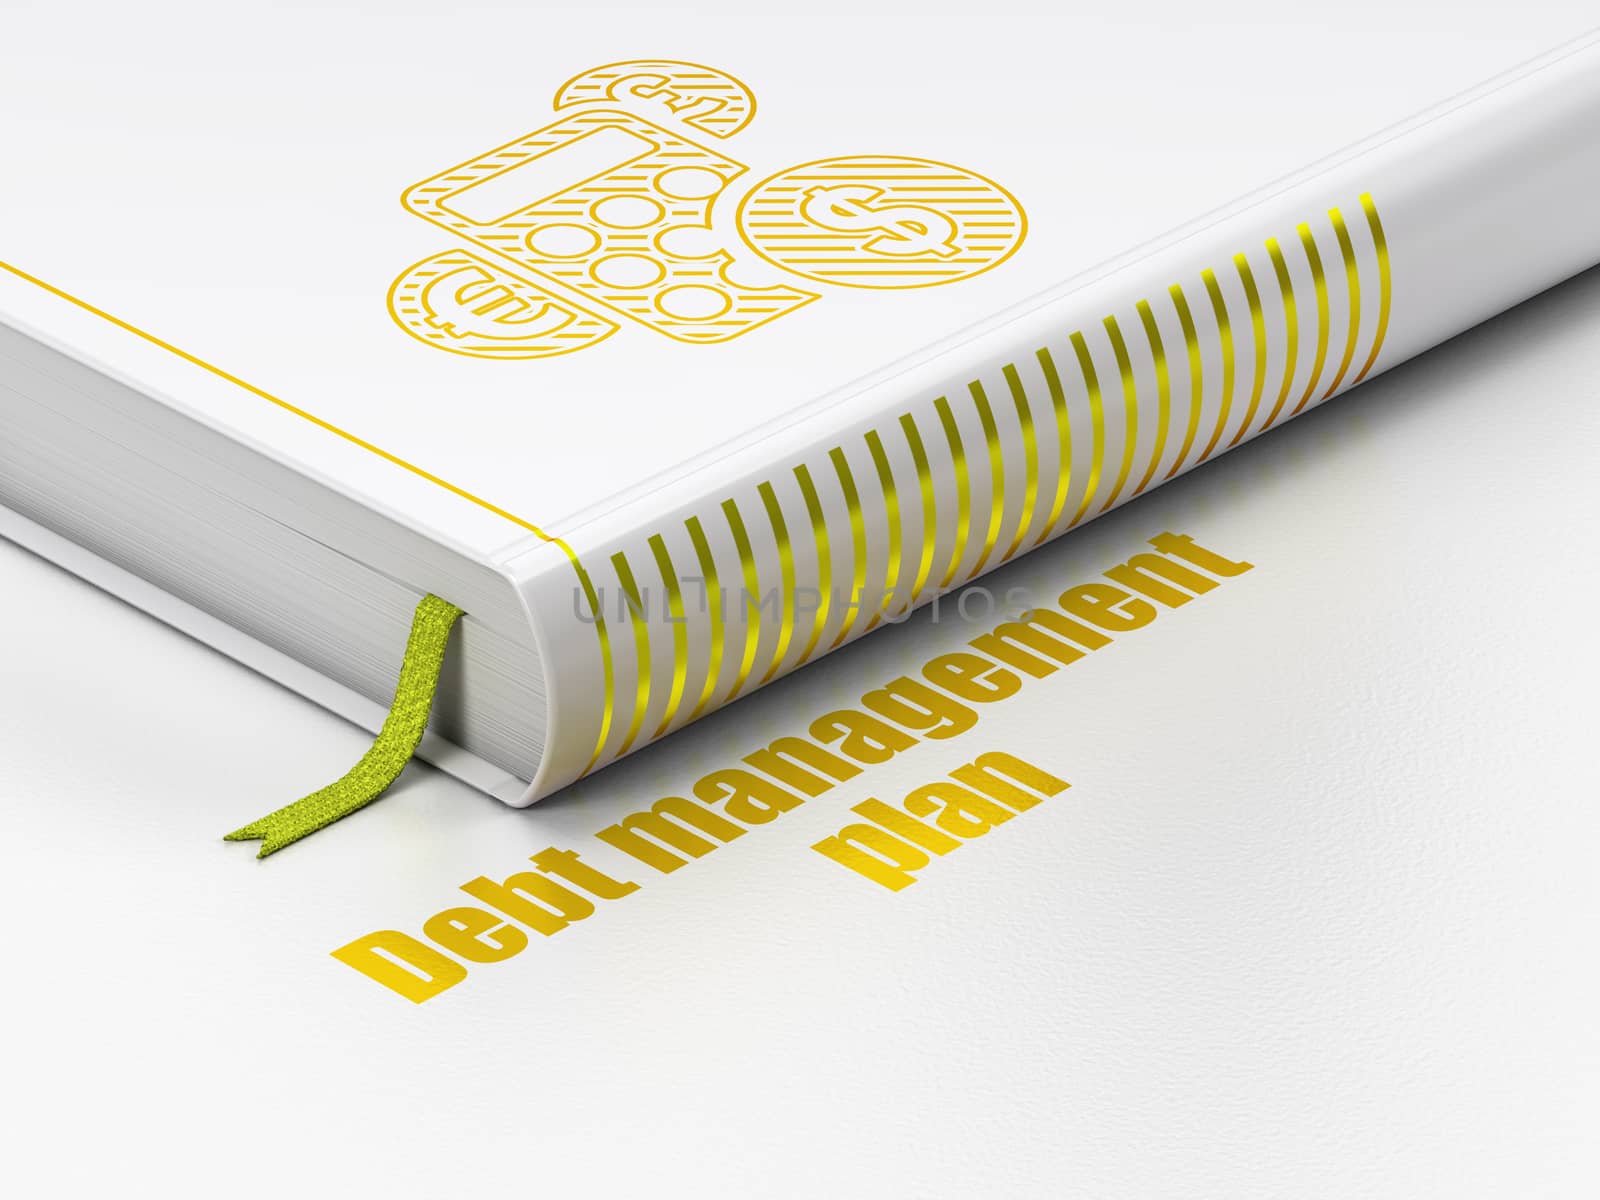 Business concept: closed book with Gold Calculator icon and text Debt Management Plan on floor, white background, 3D rendering